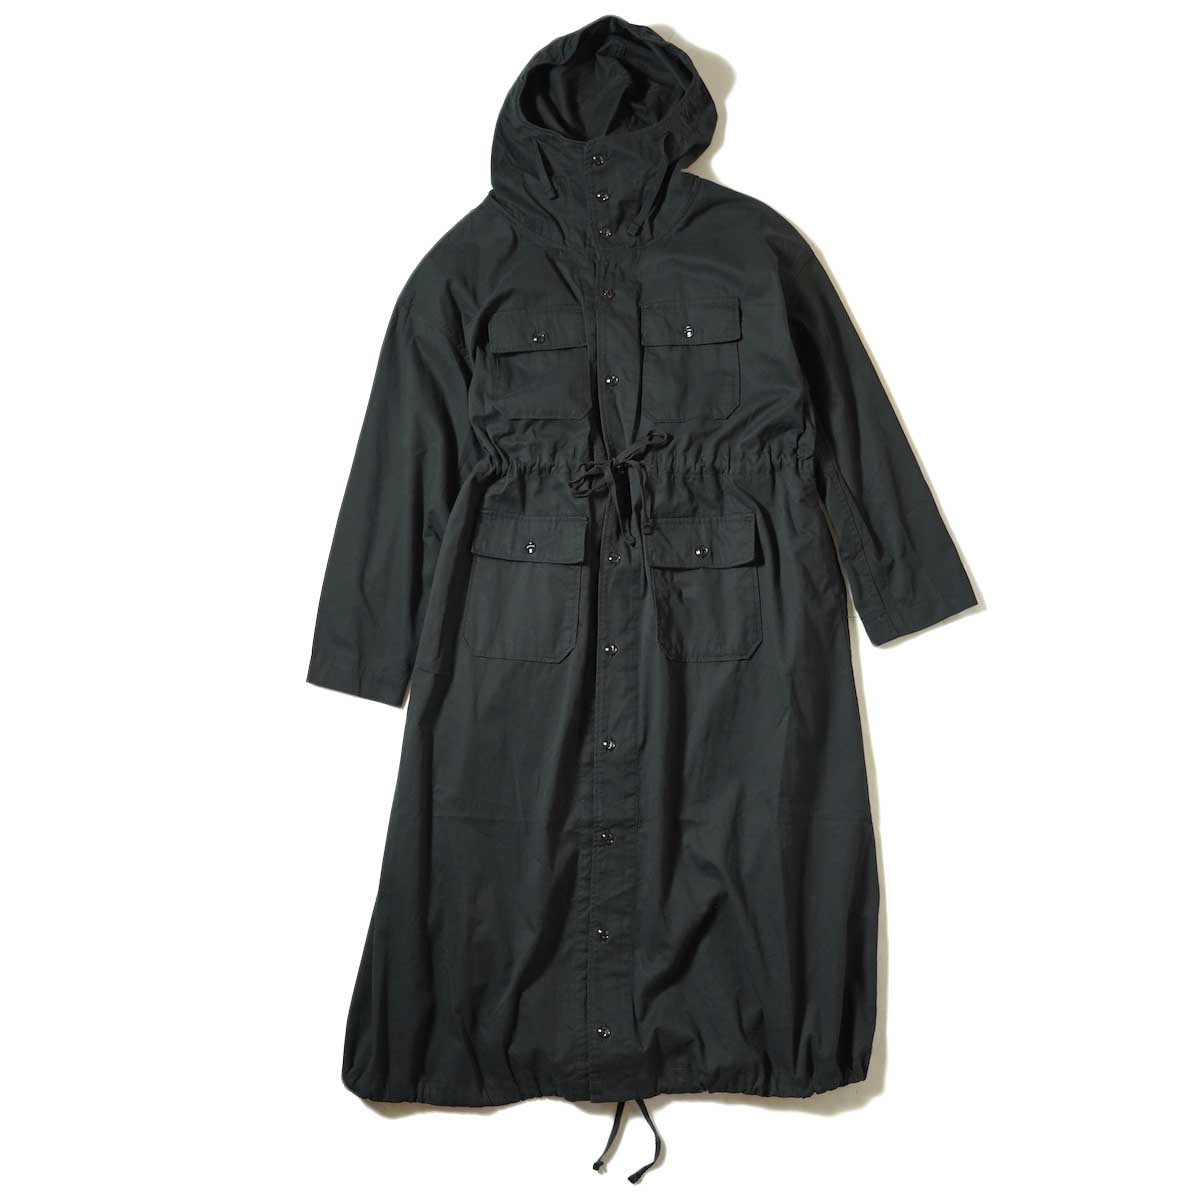 Engineered Garments / Cagoule Dress (Black Cotton Micro Sanded Twill)